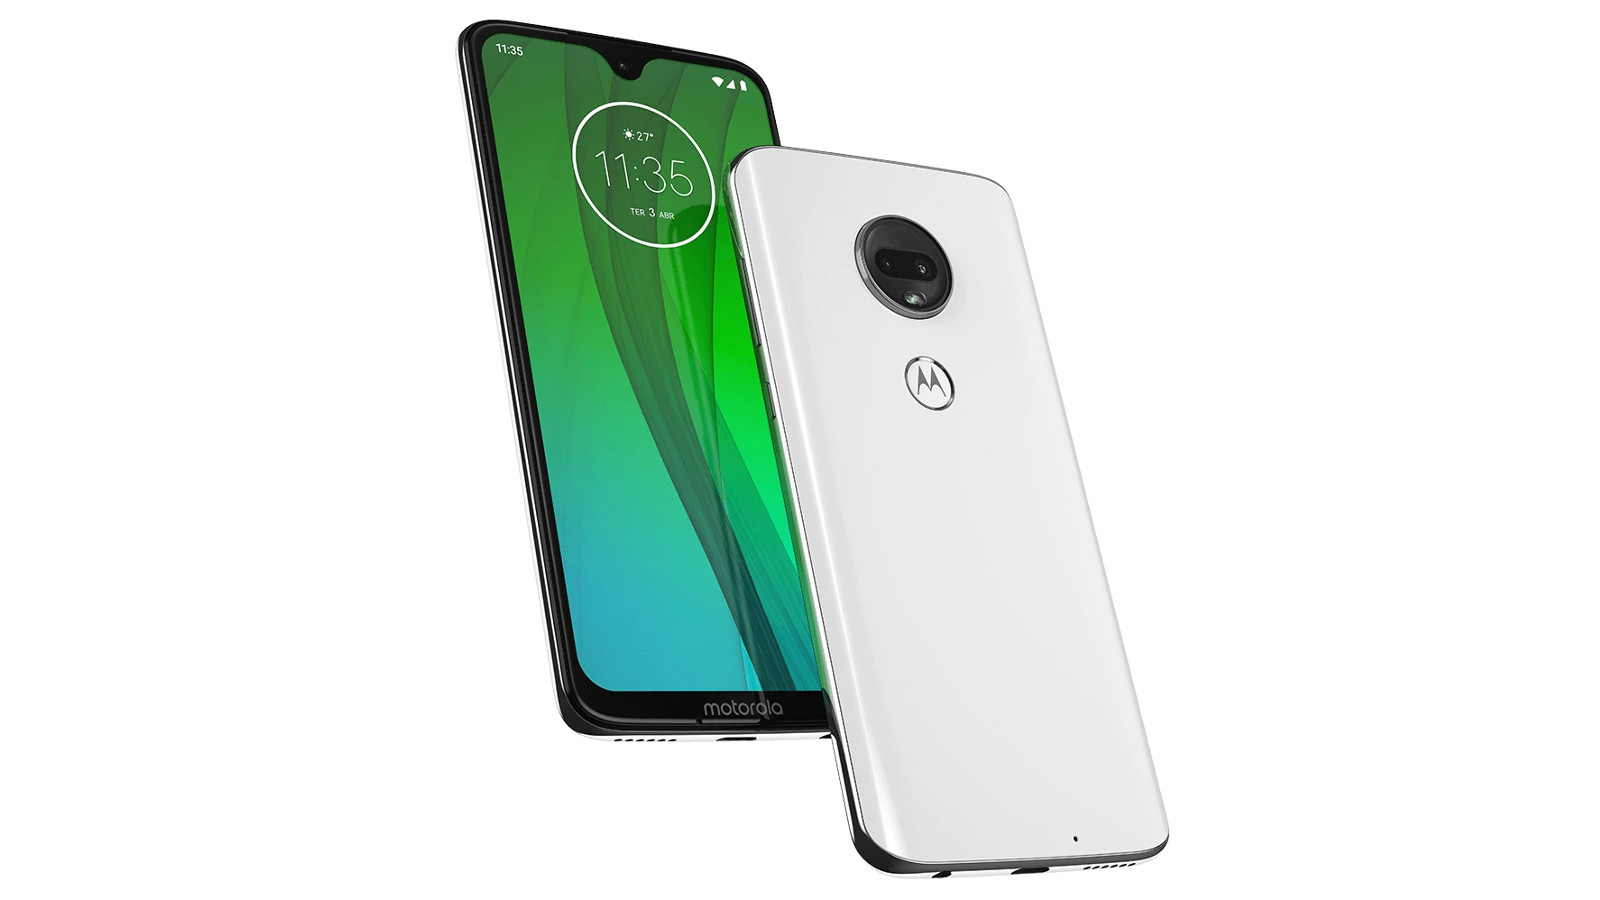 A leaked render apparently showing the Moto G7 with price starting at $$.